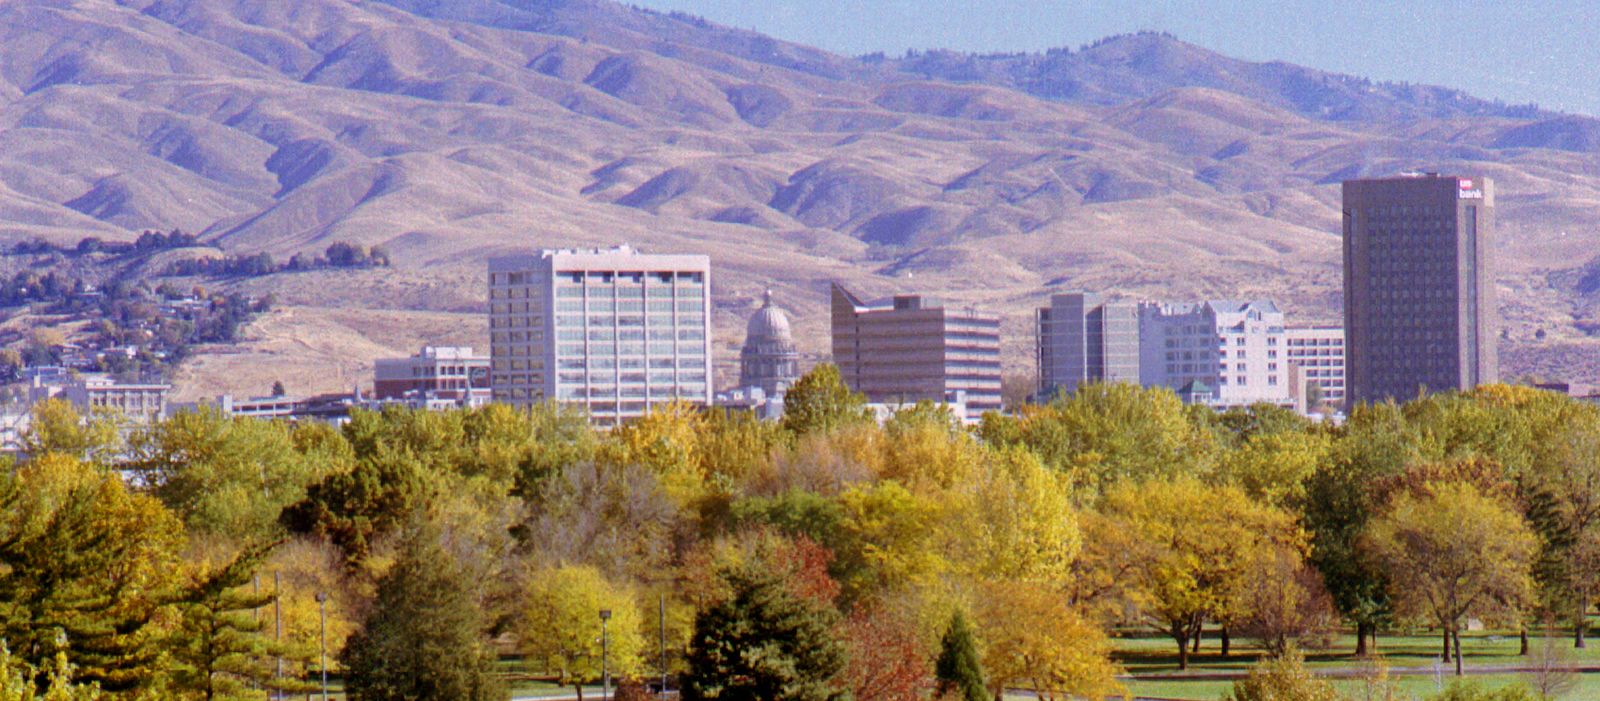 Idaho's capital city, Boise was founded as a fort along the Oregon Trail.